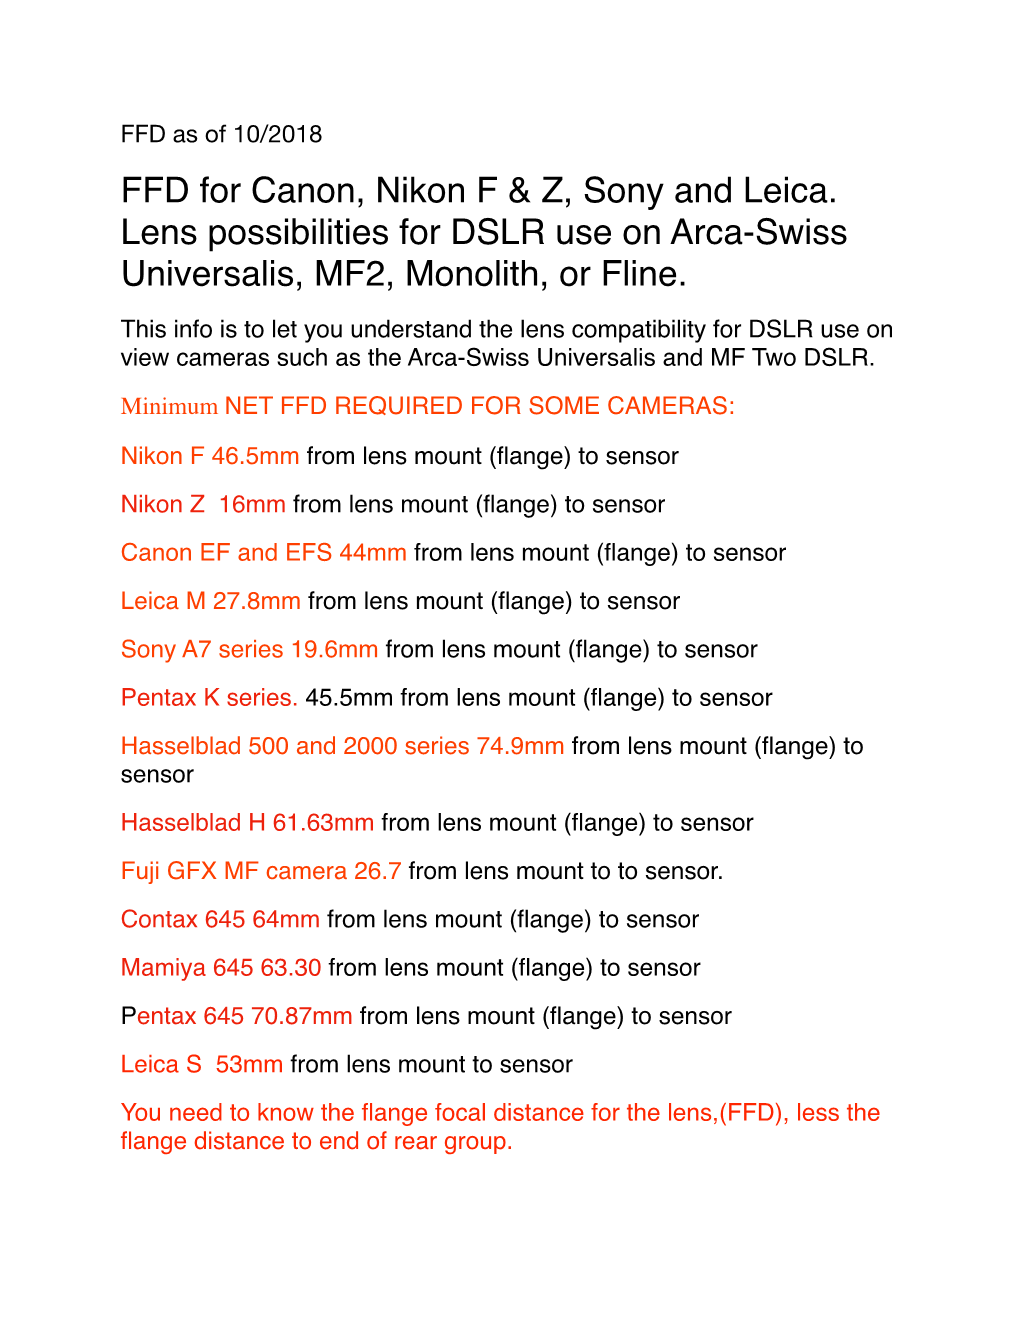 FFD for Canon, Nikon F & Z, Sony and Leica. Lens Possibilities for DSLR